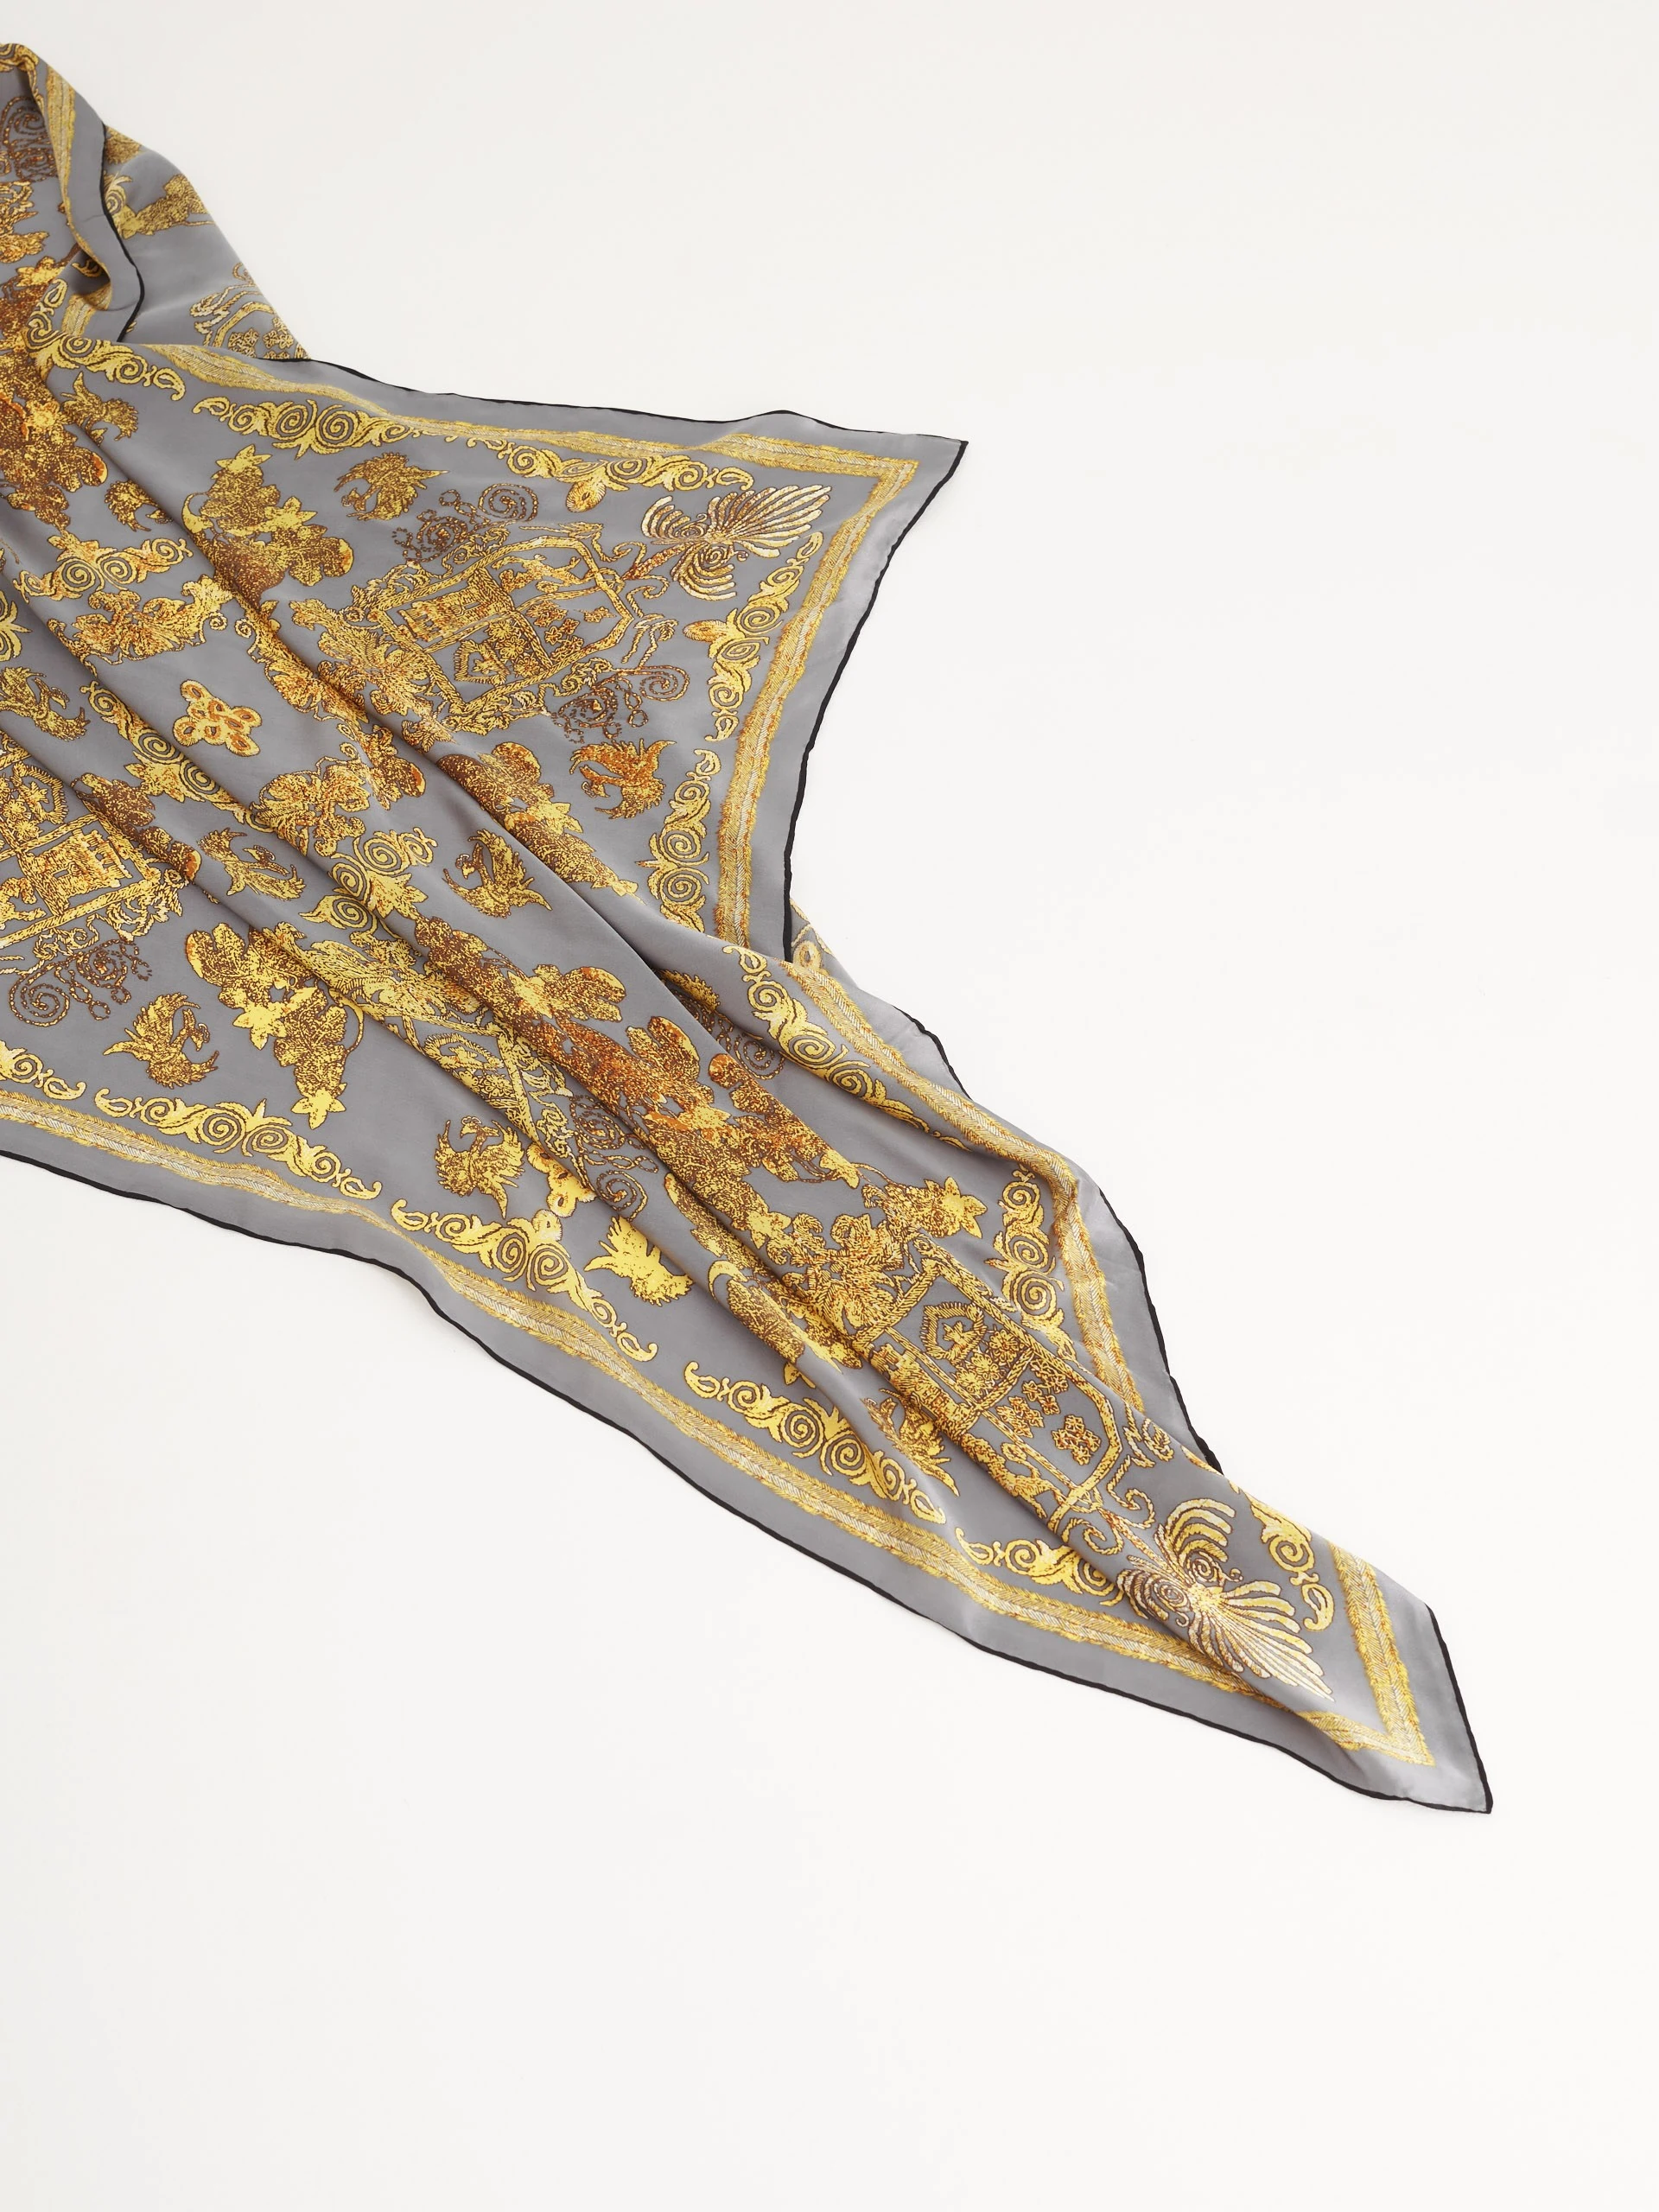 Large neckerchief with rich pattern